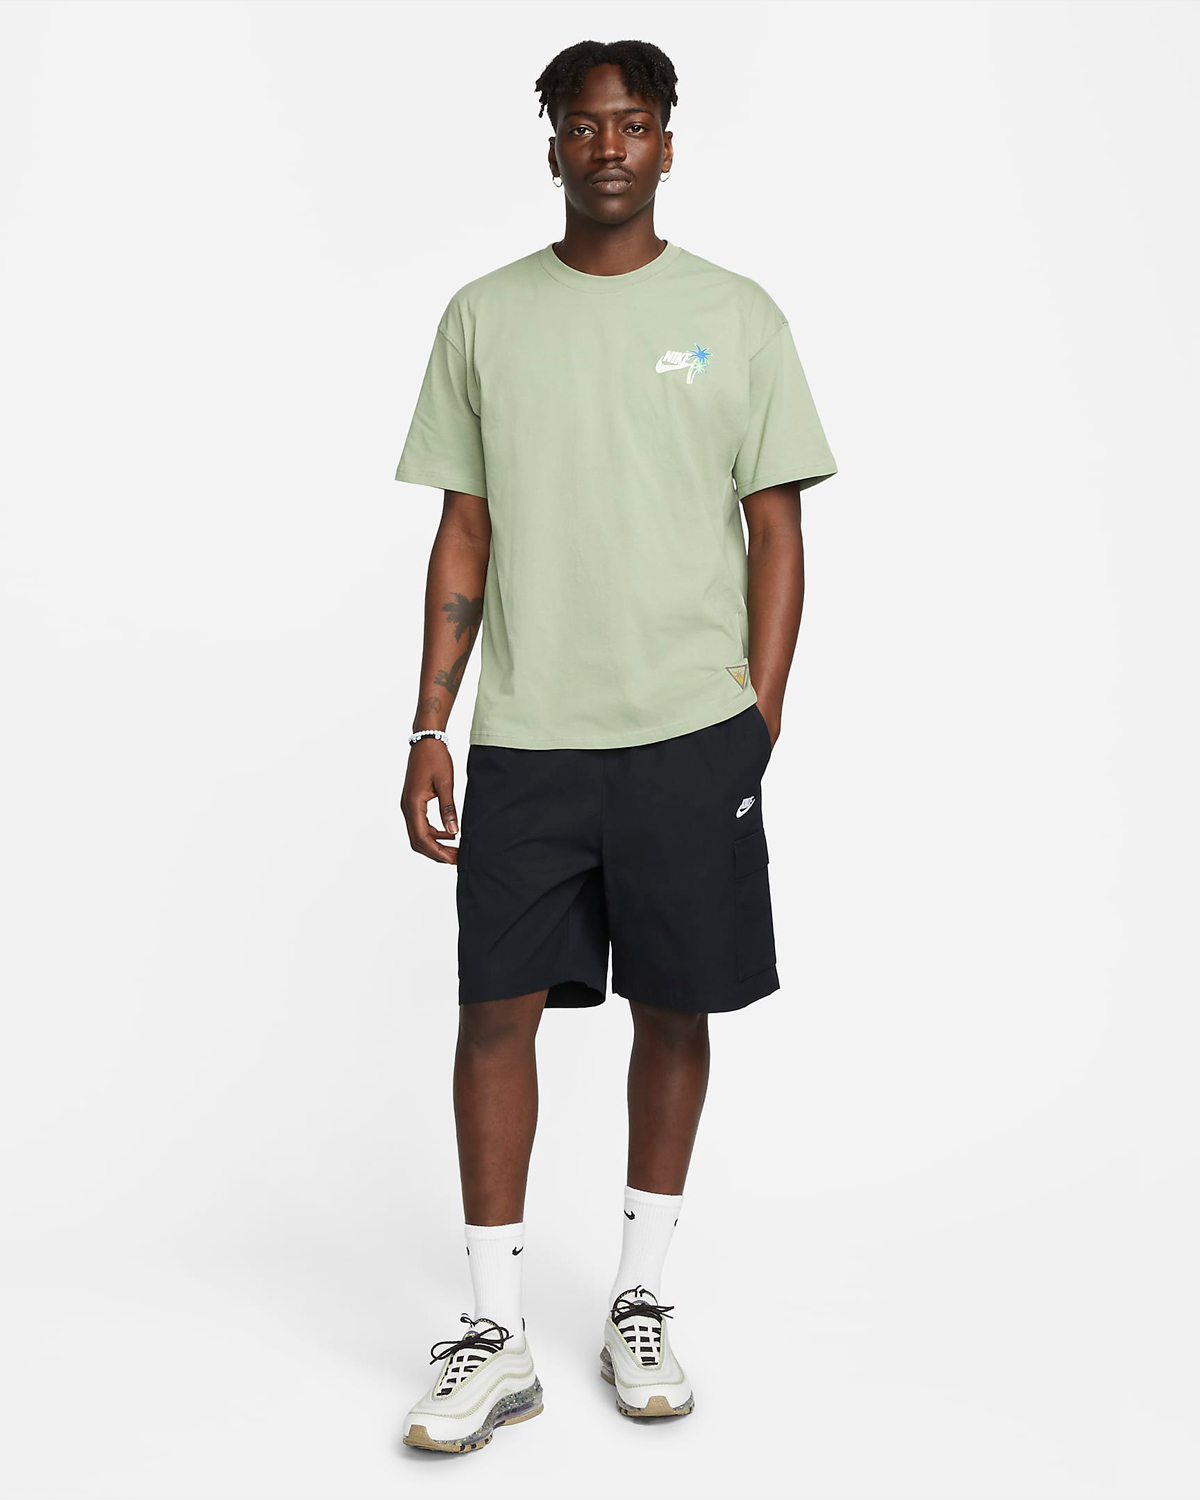 Nike-Sportswear-Surf-Dog-T-Shirt-Oil-Green-Outfit